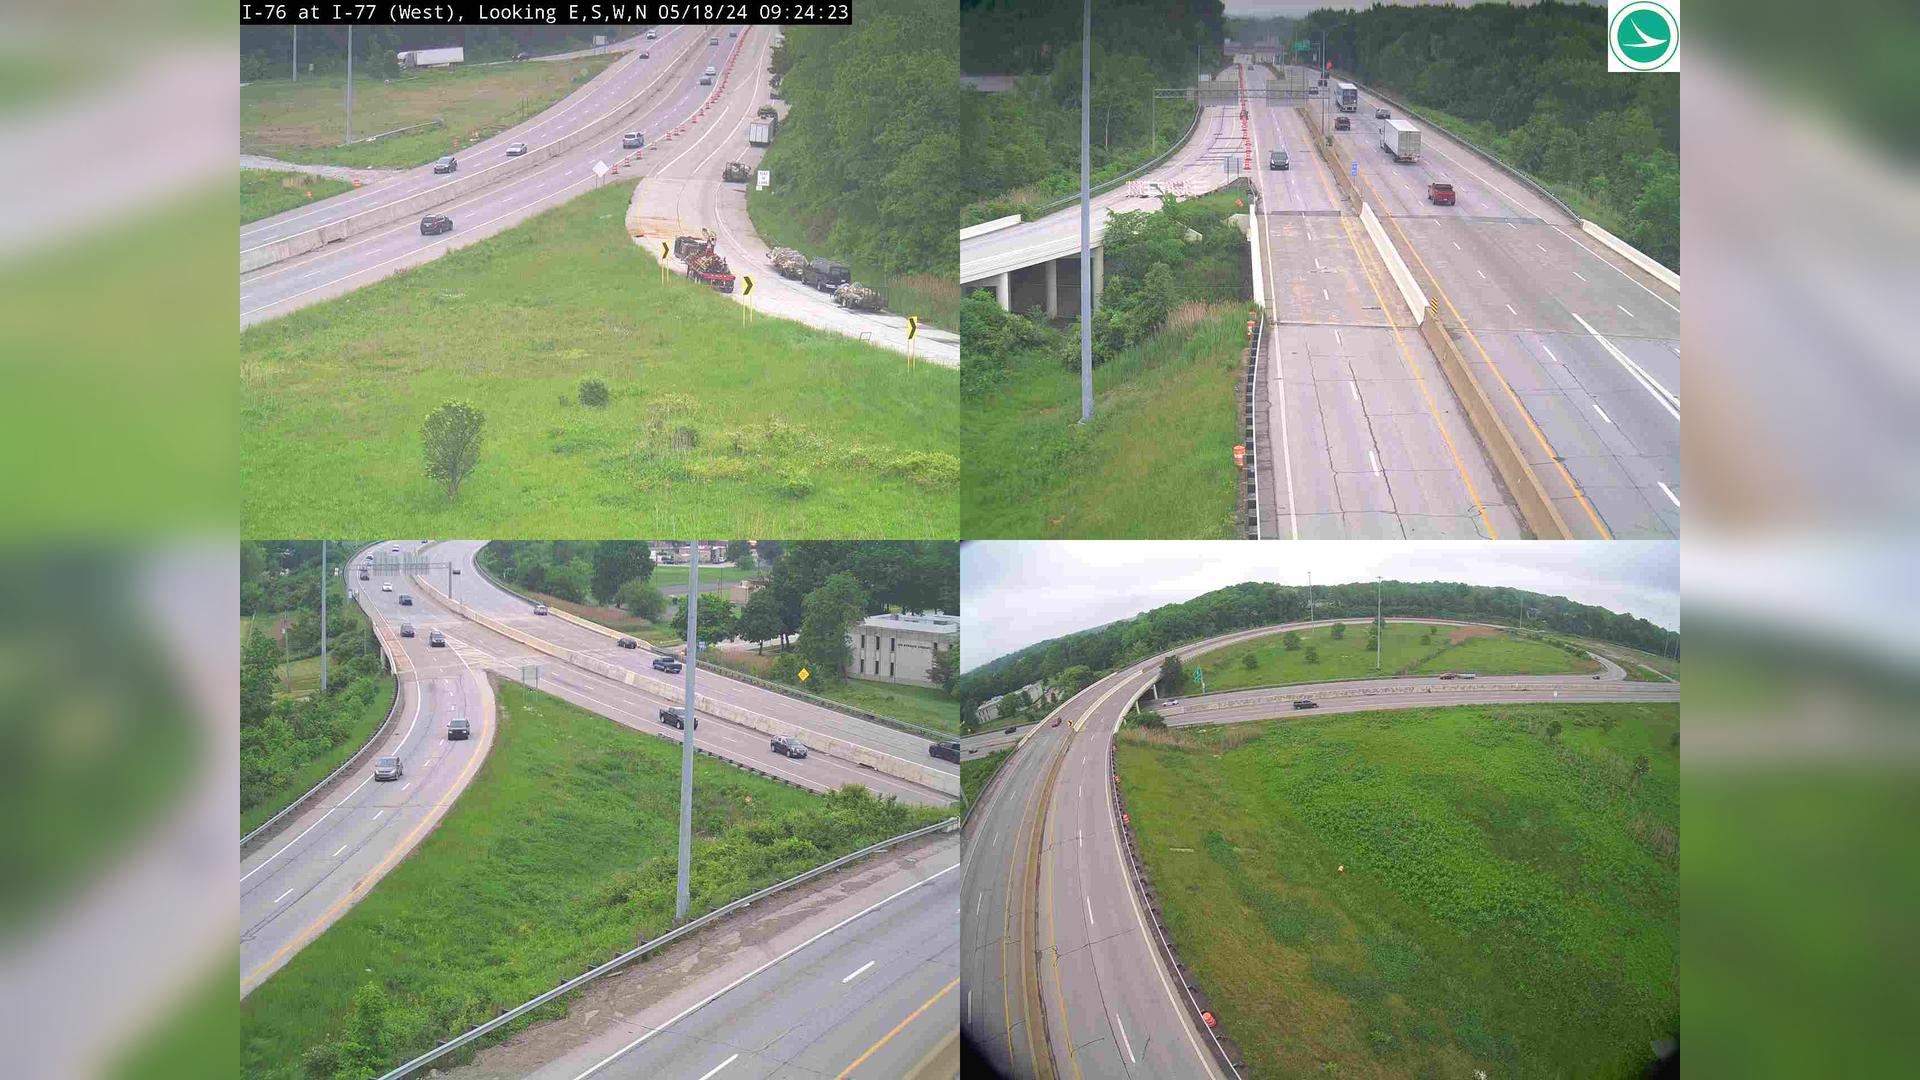 Traffic Cam Akron: I-76 at I-77 (West) Player